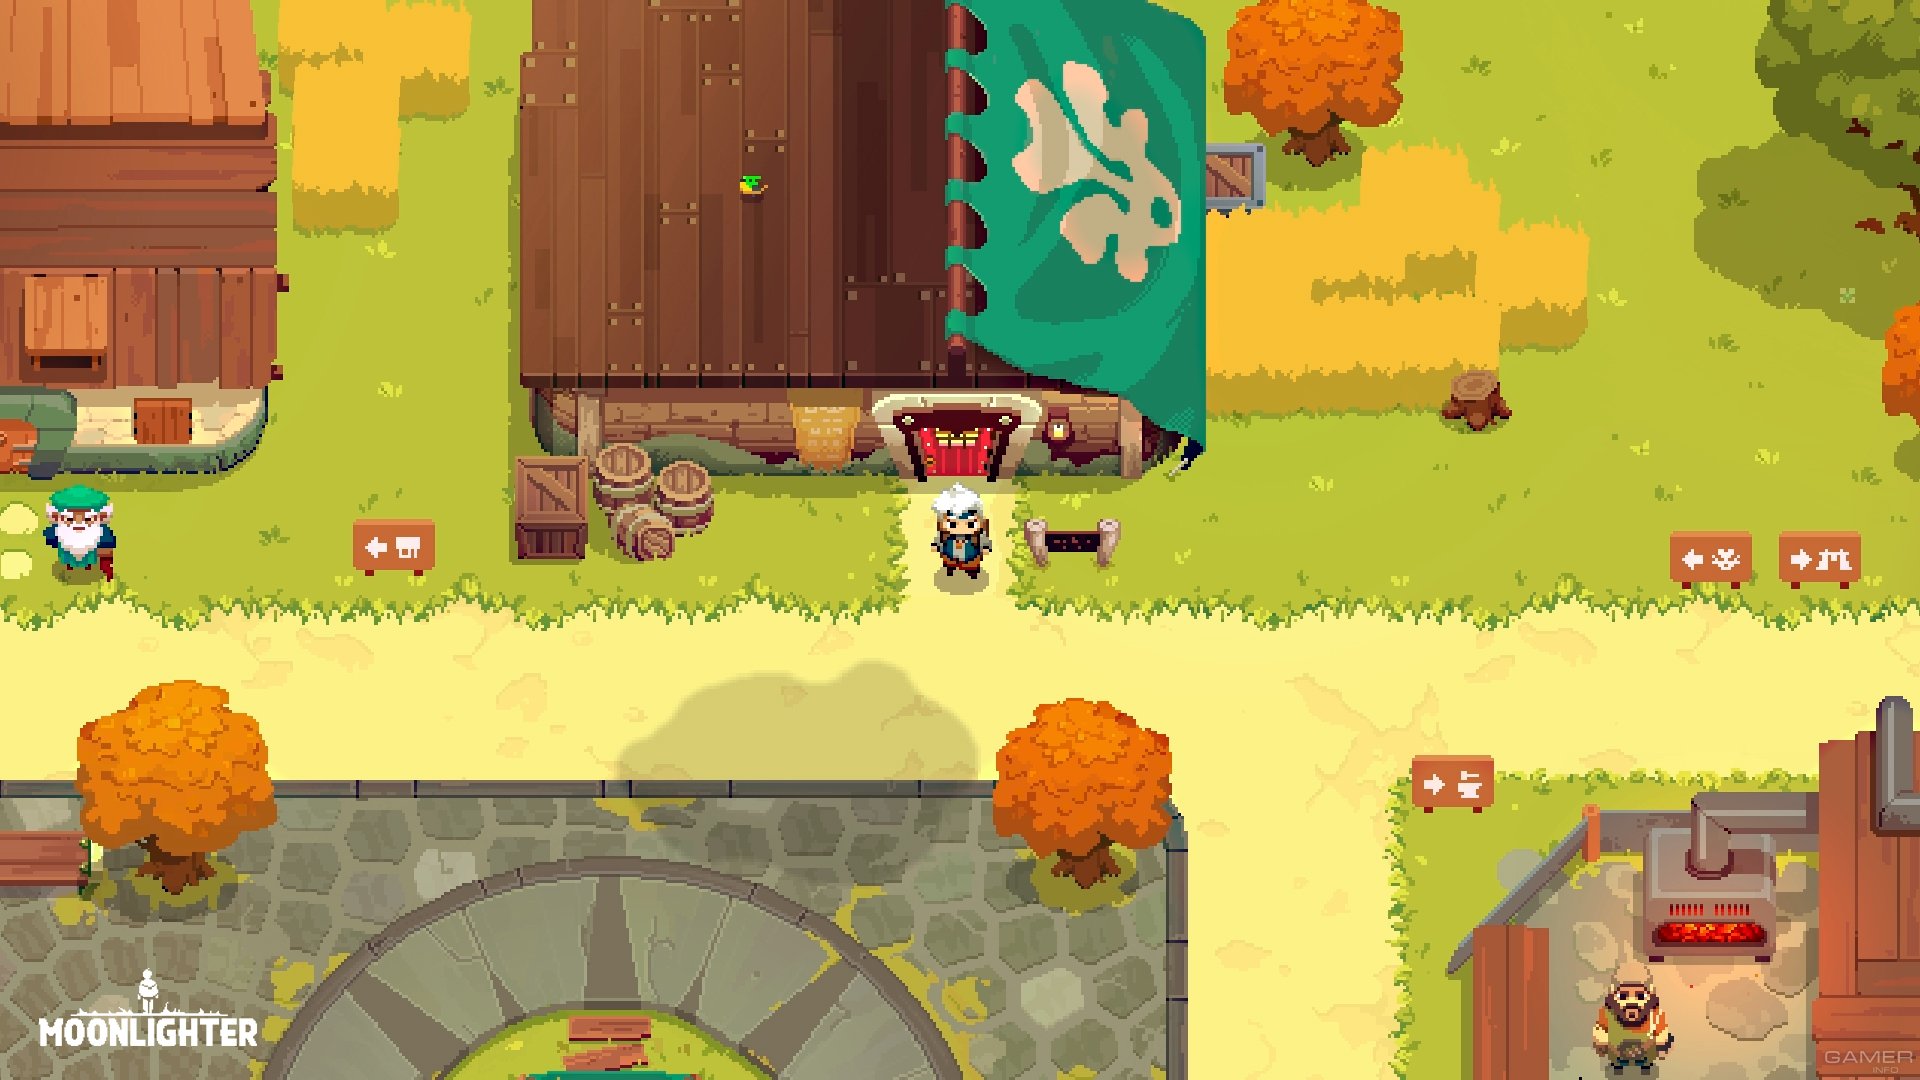 moonlighter on switch download